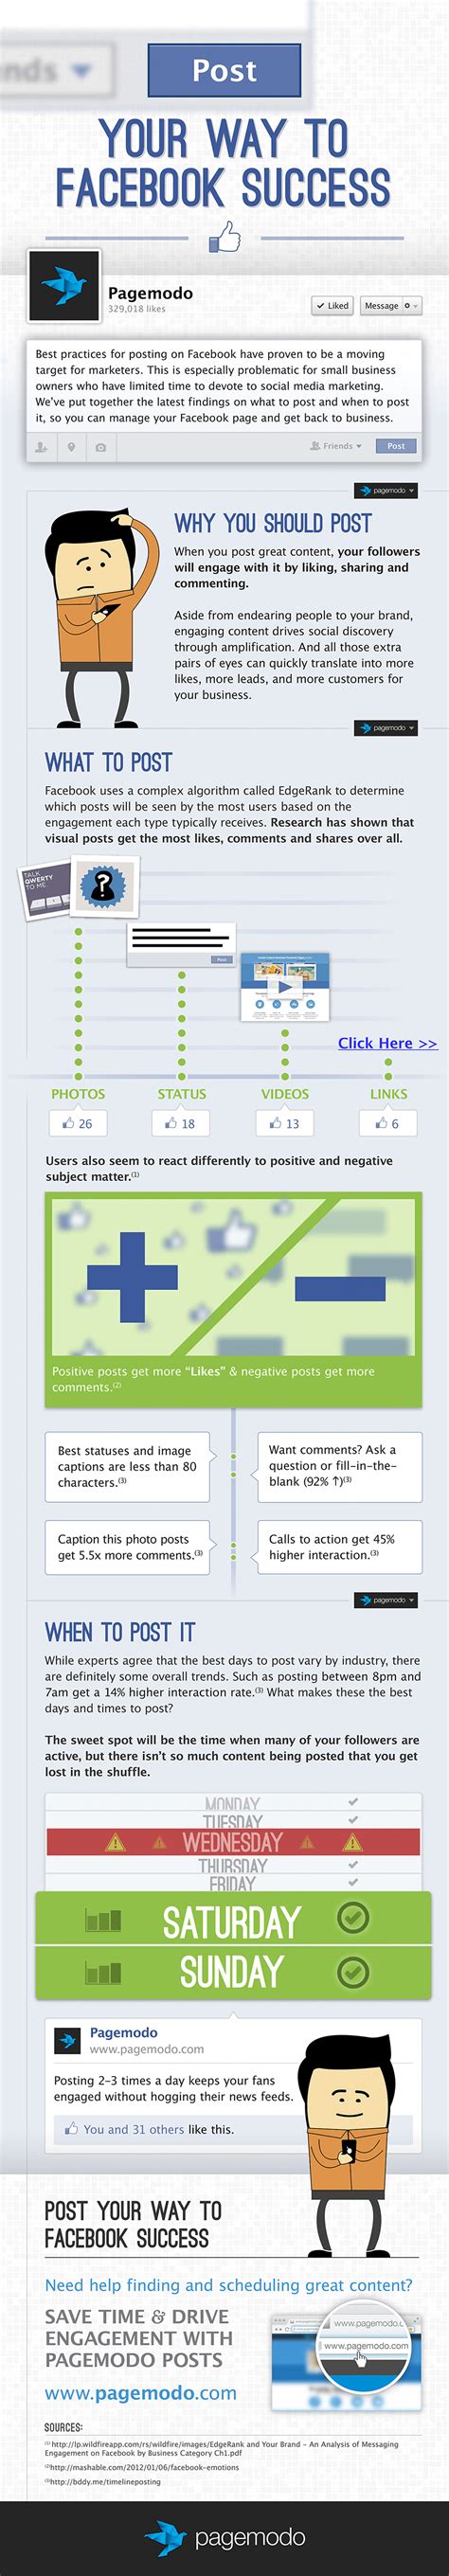 Visual guide to successful Facebook page updates - Socialbrite